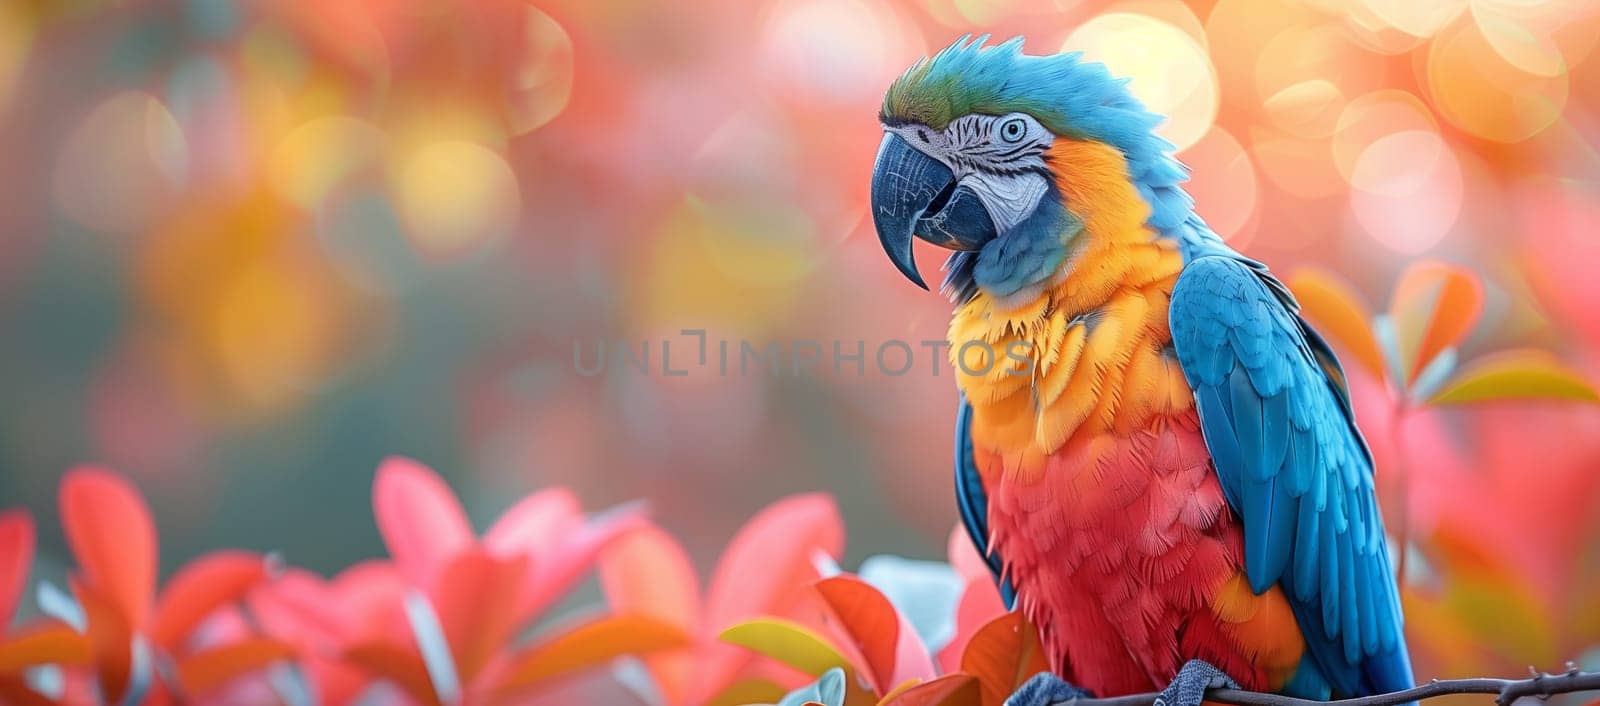 A vibrant macaw parrot is gracefully perched on a branch, its colorful feathers shining beautifully in the sunlight